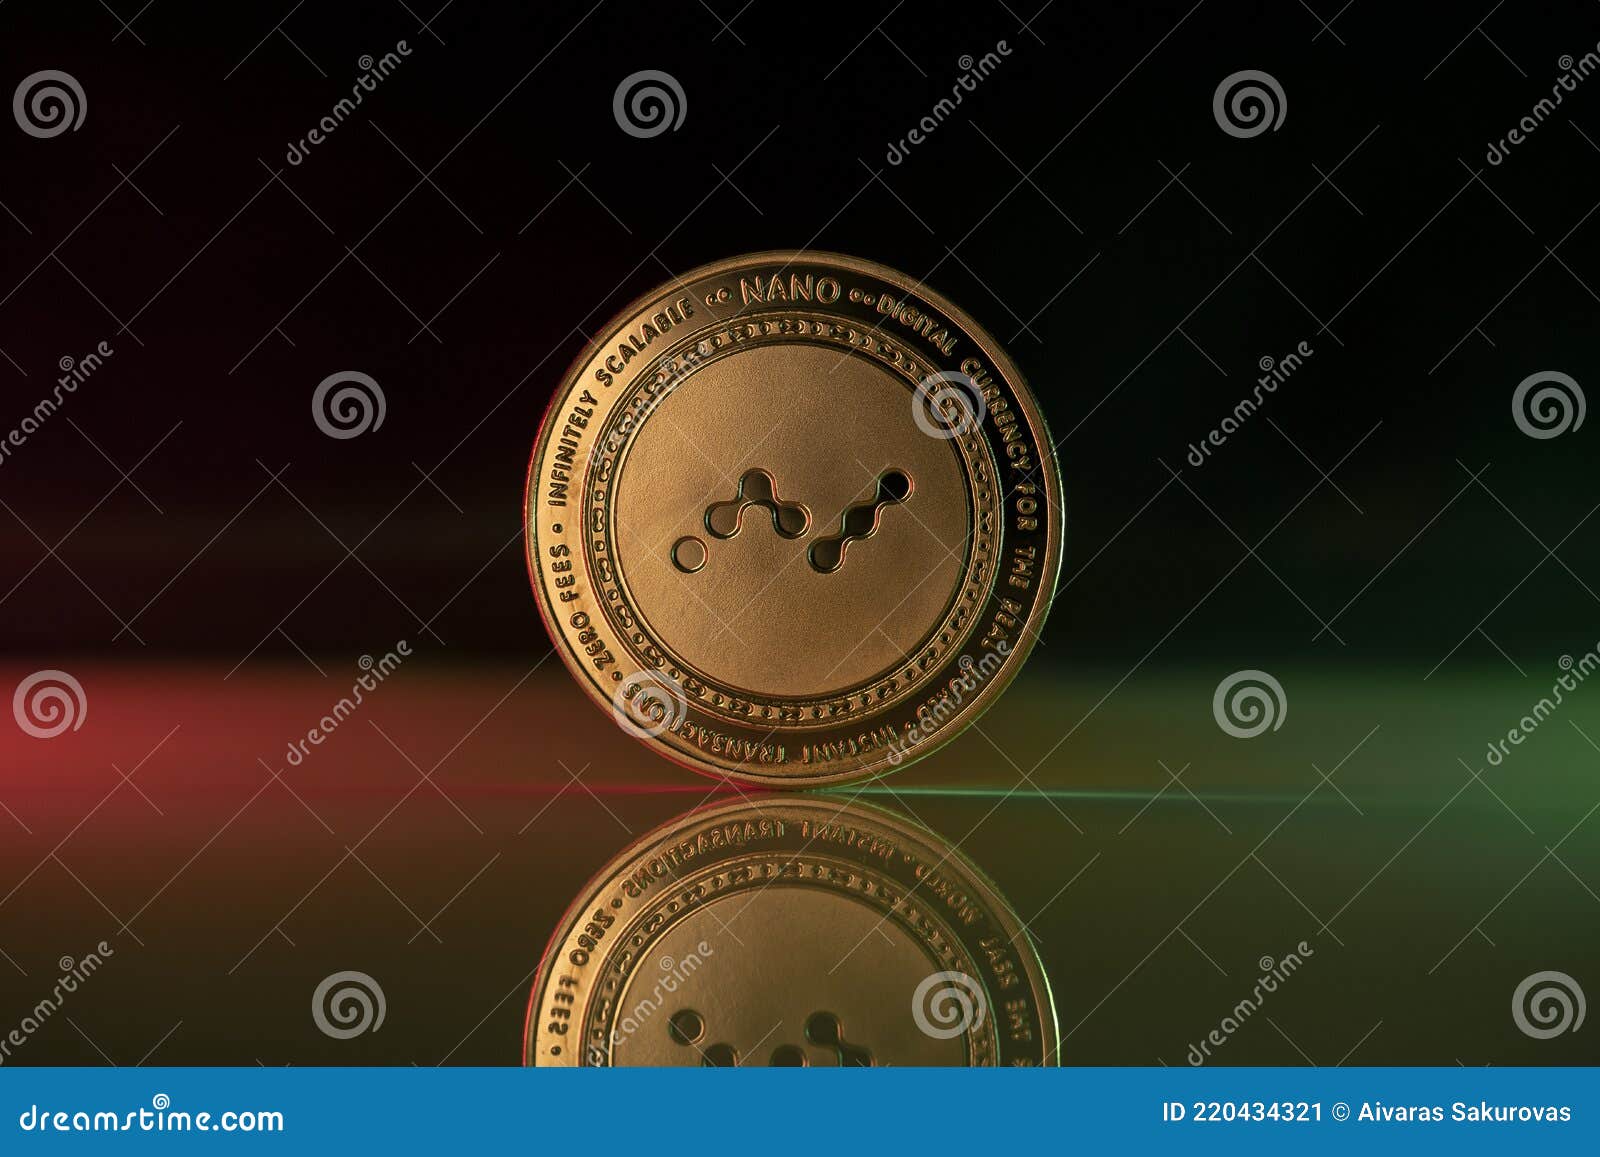 Nano Crypto Coin Placed On Reflective Surface And Lit With Green And Red Lights Stock Image